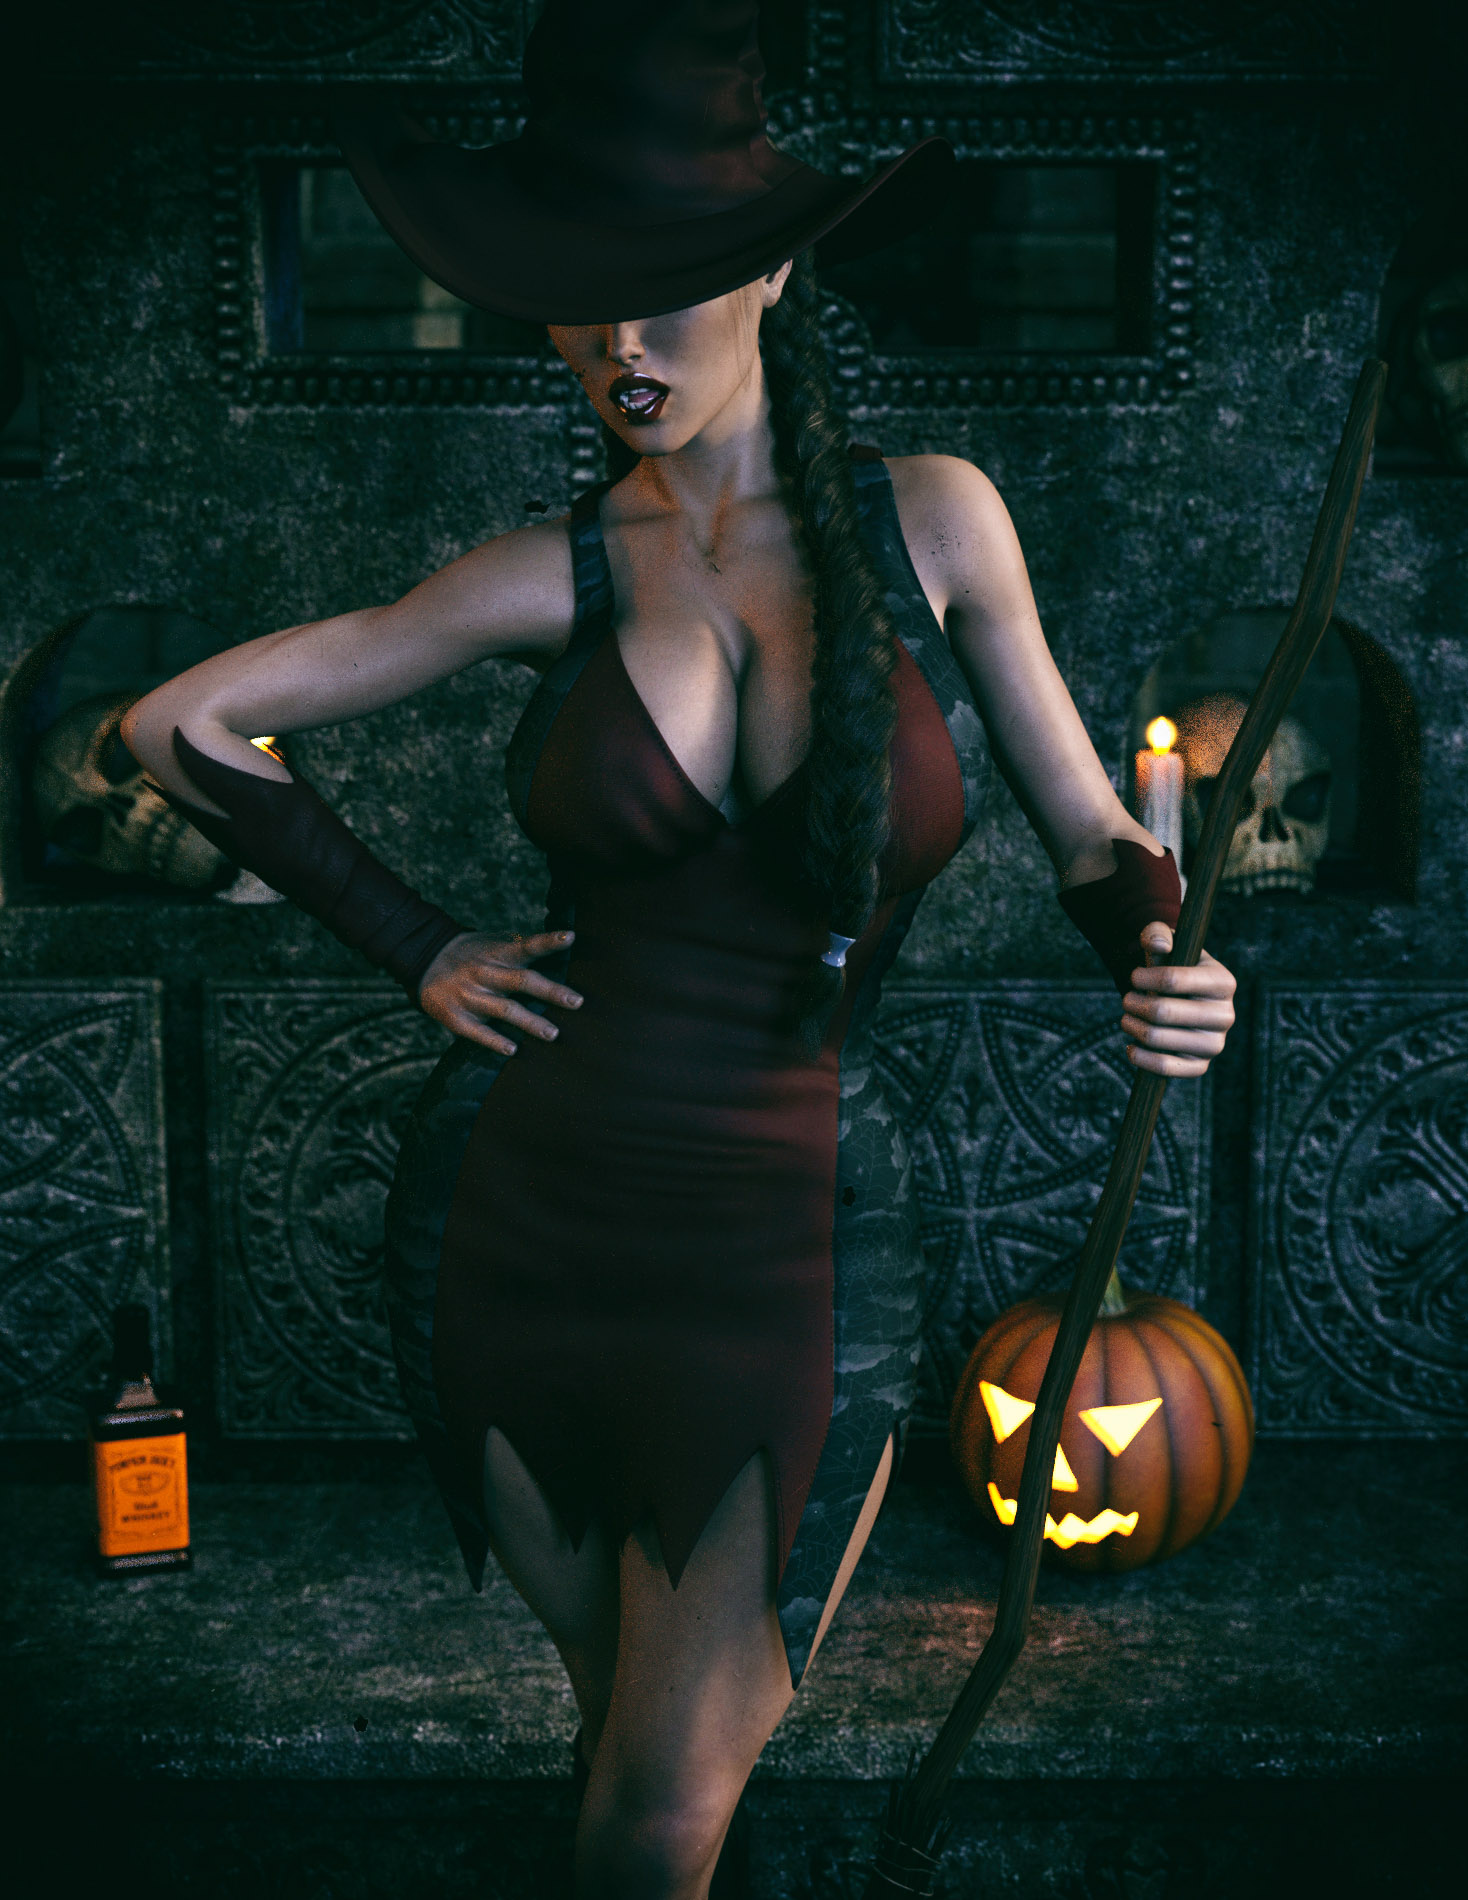 Cara Lox looks great as a sexy witch! 